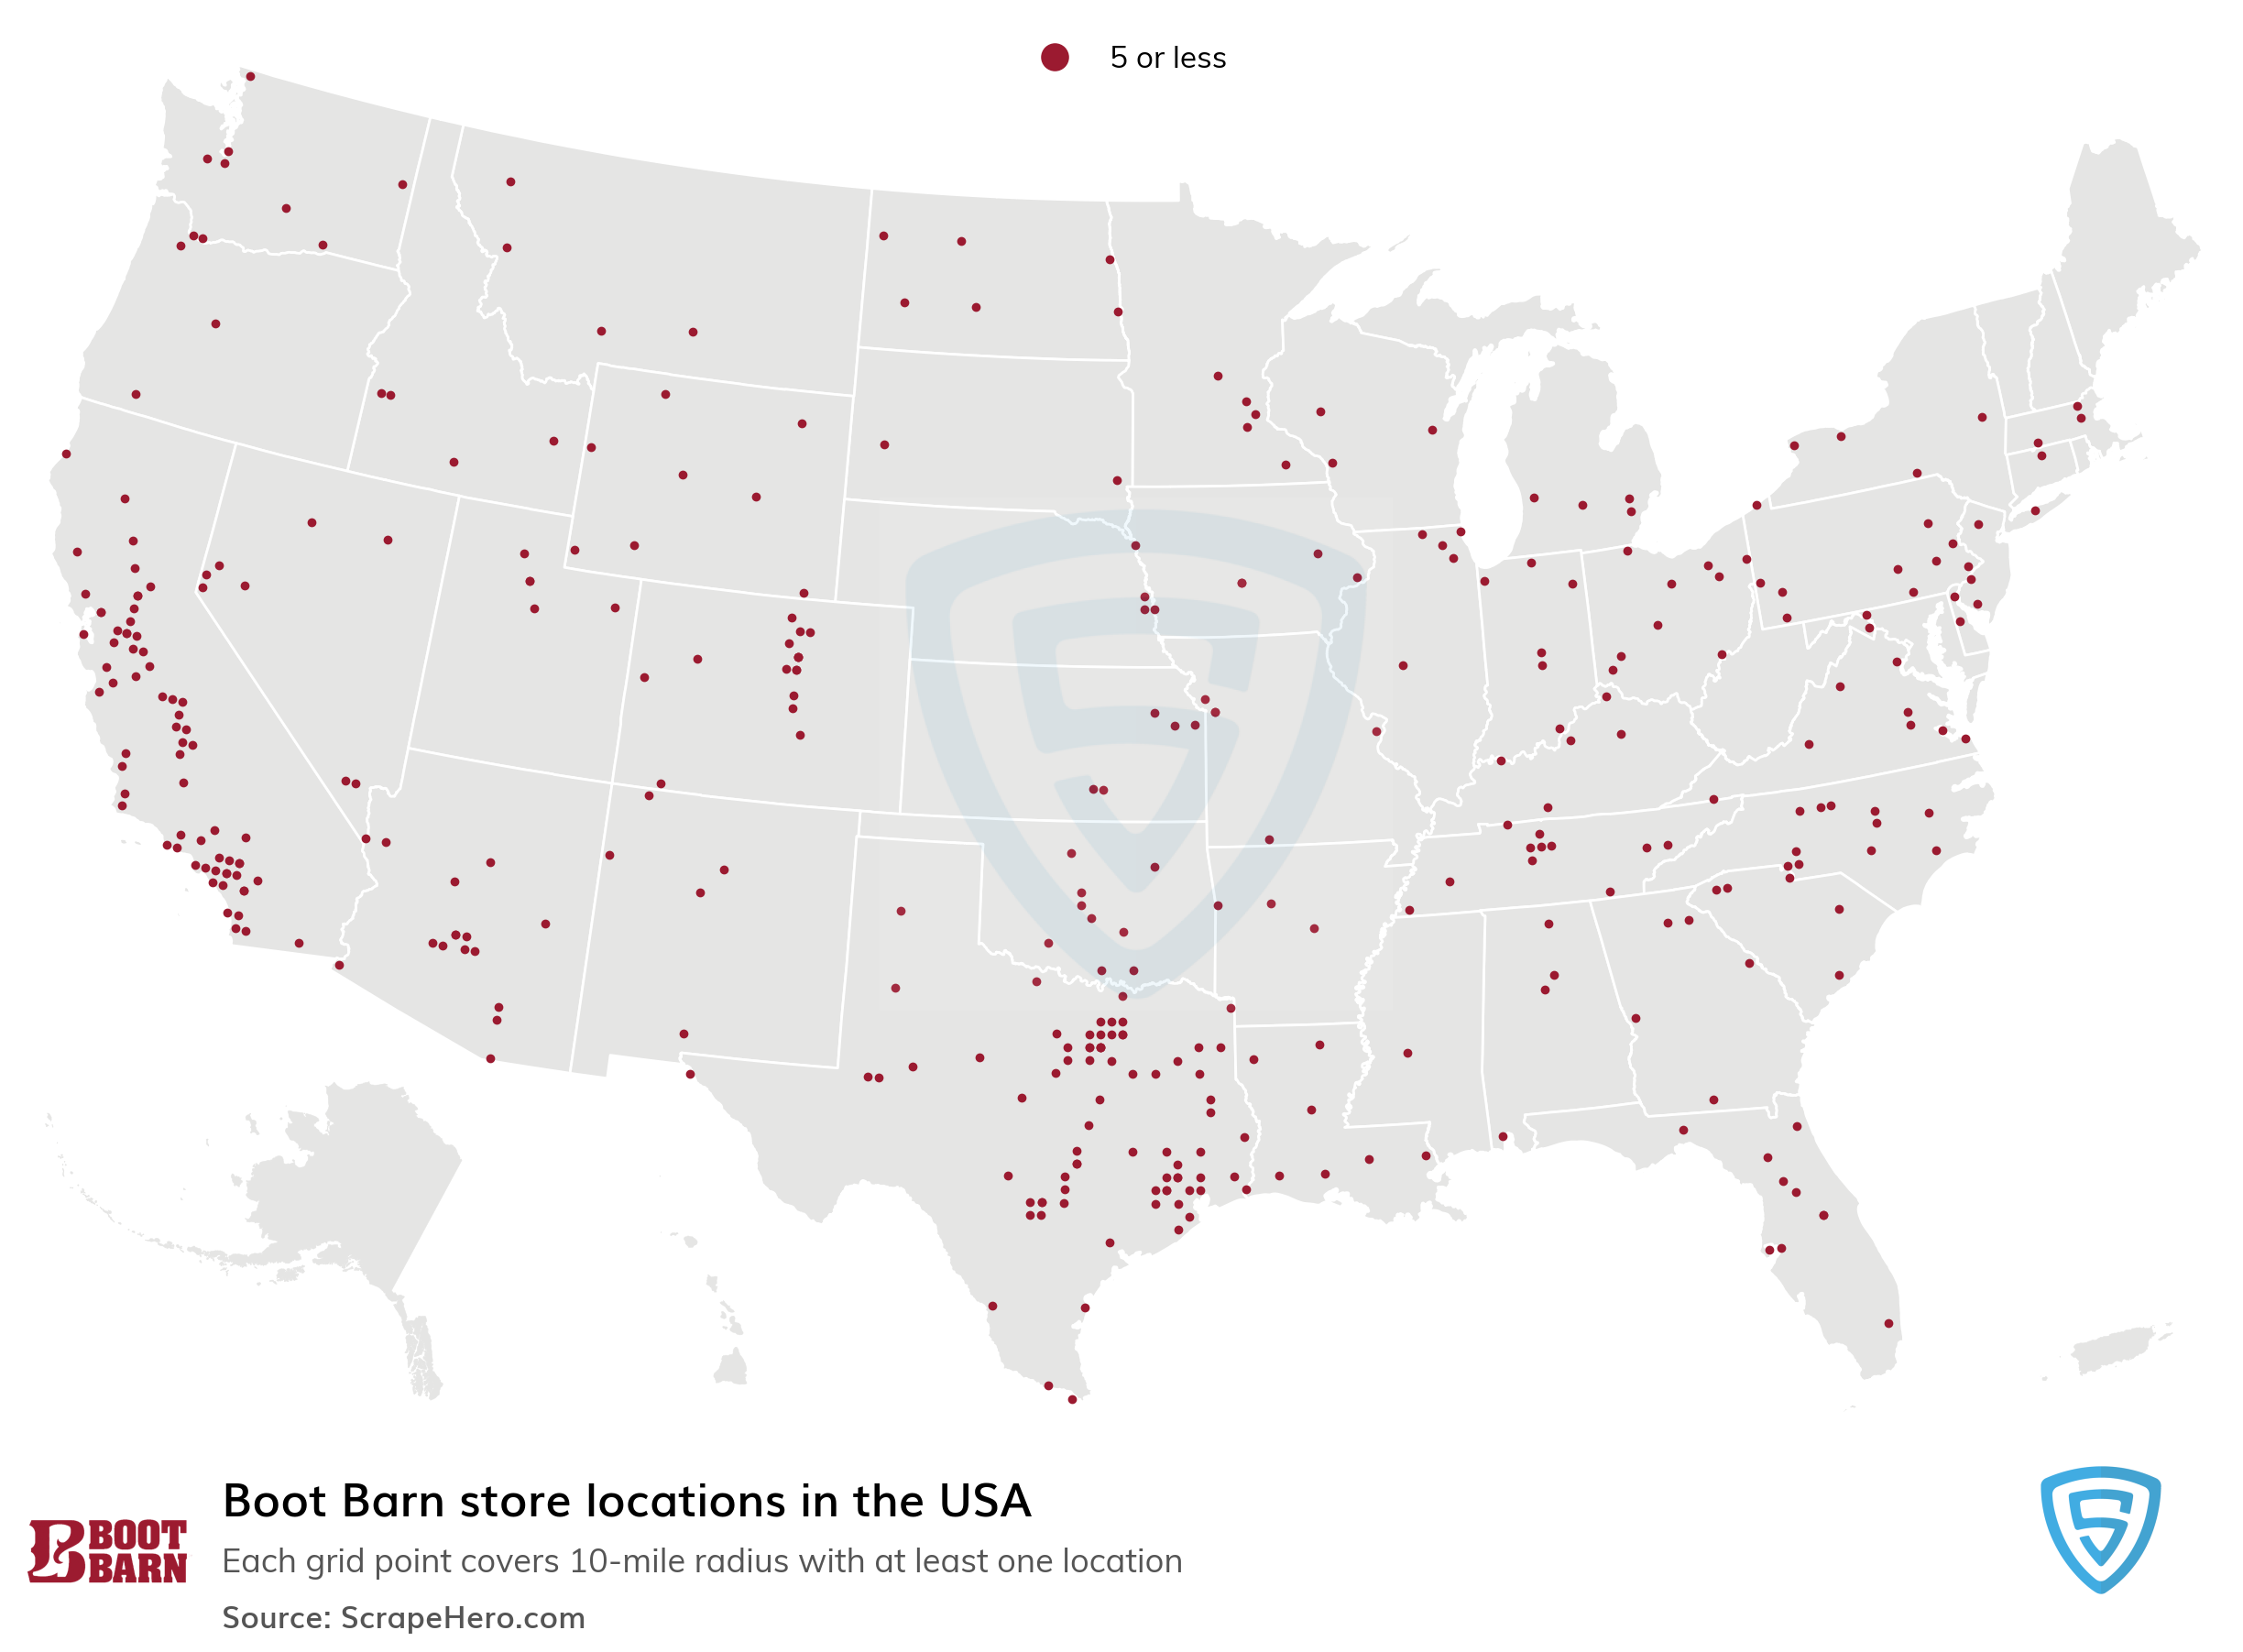 Boot Barn Store Locations in The USA